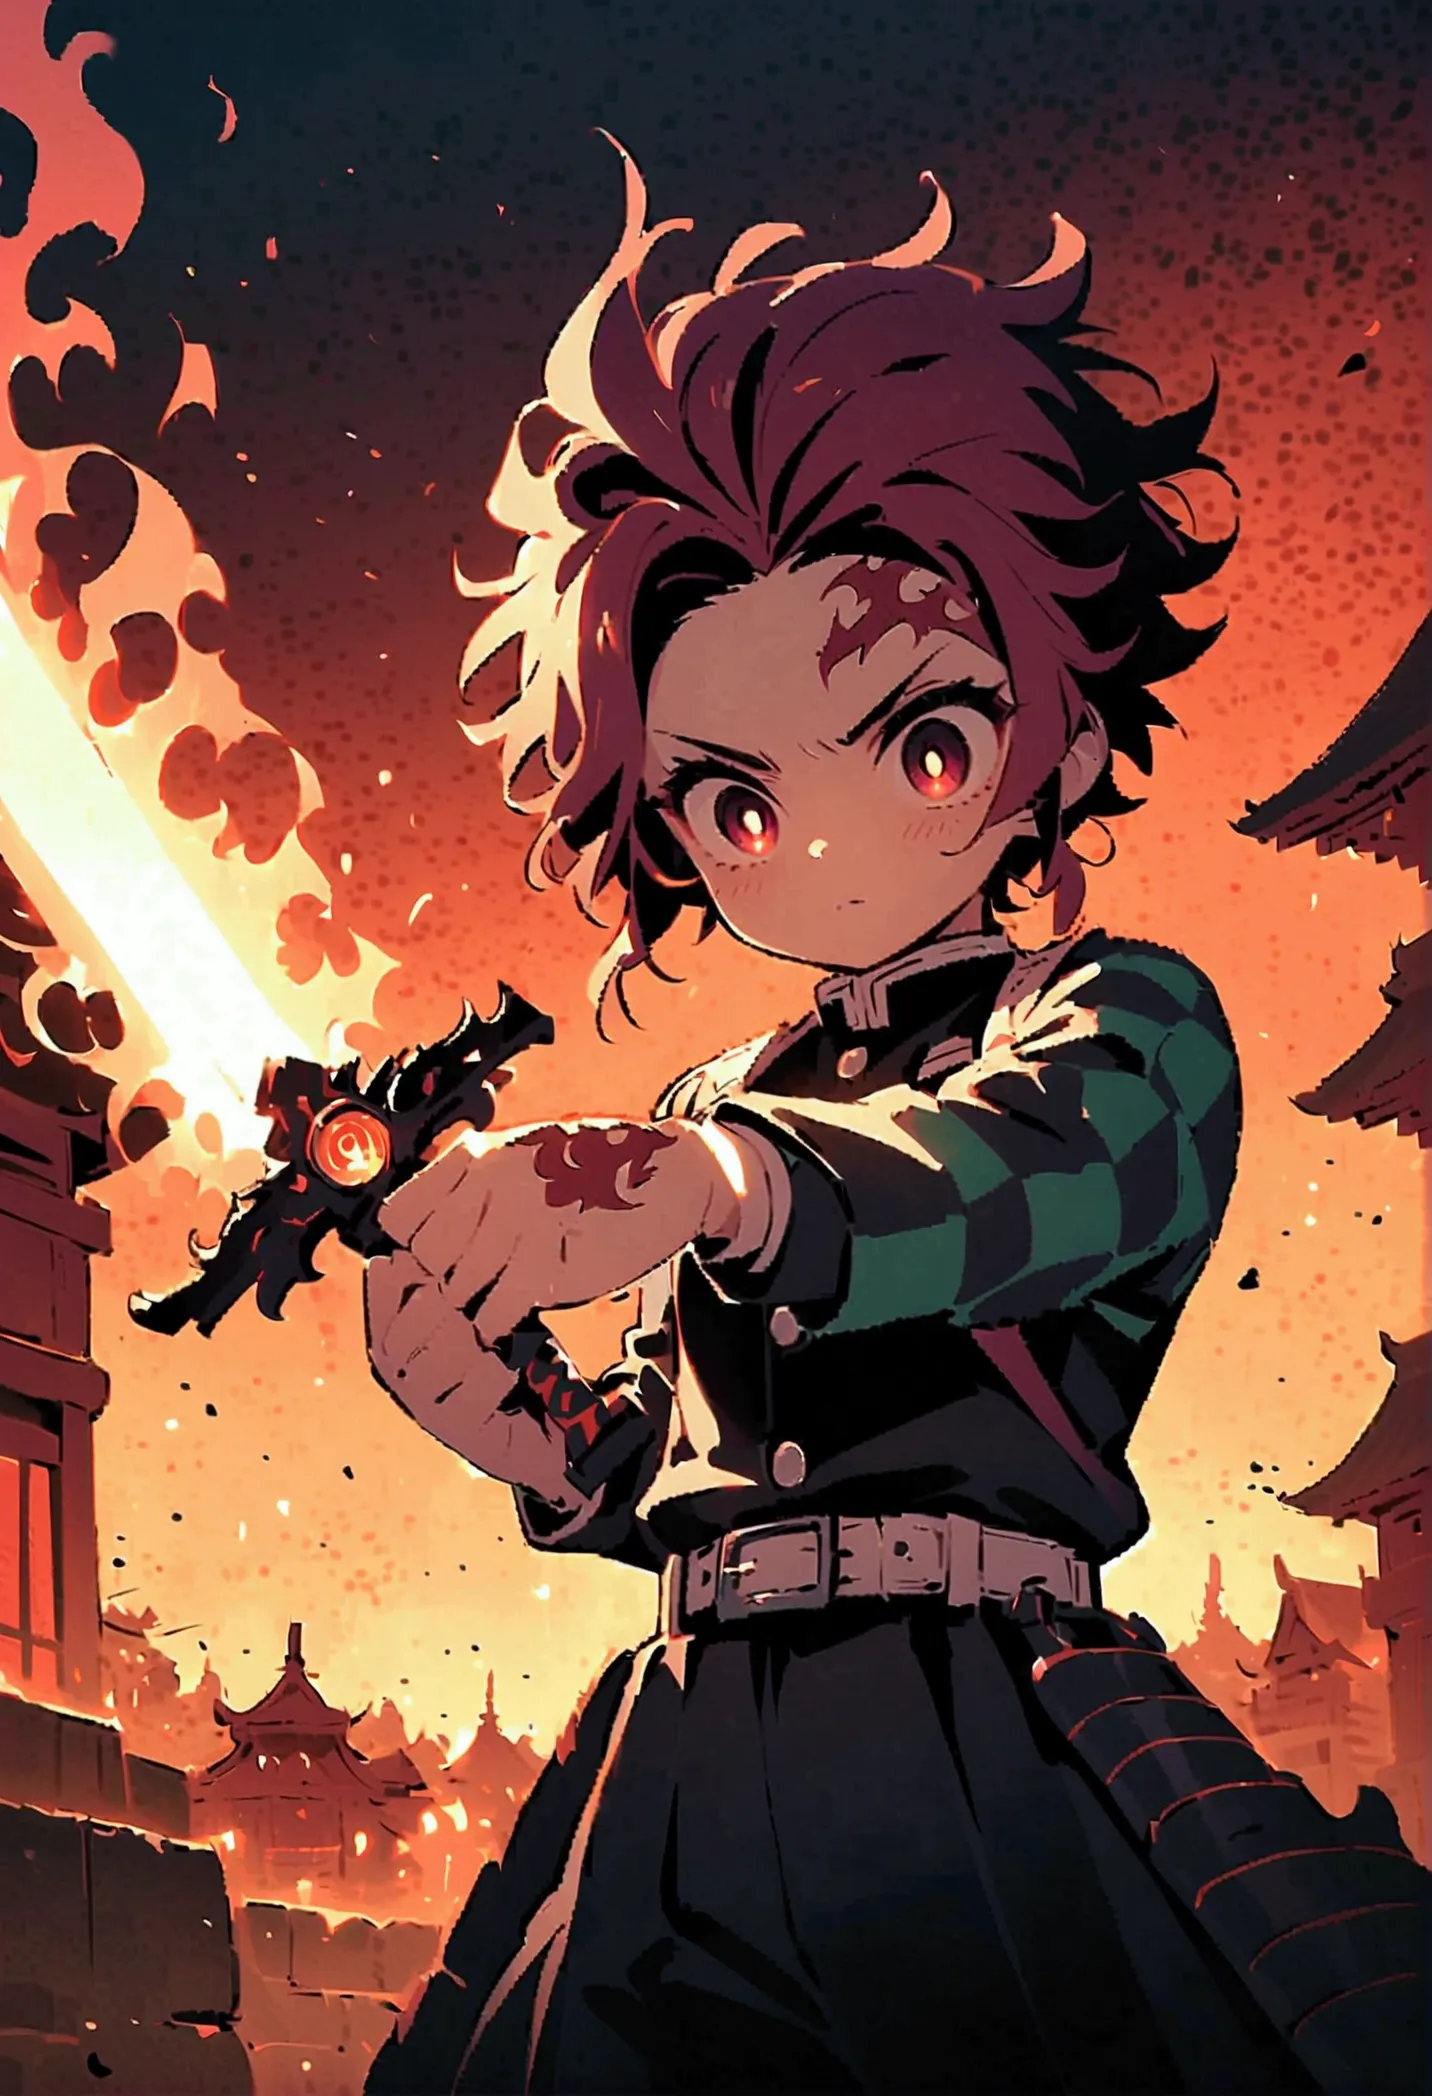 tanjiro kamado, Demon Slayer Anime, Focus of weapons，Bright redhead, Glowing red eyeballs，Intricate tattoos，(With a flaming swor...